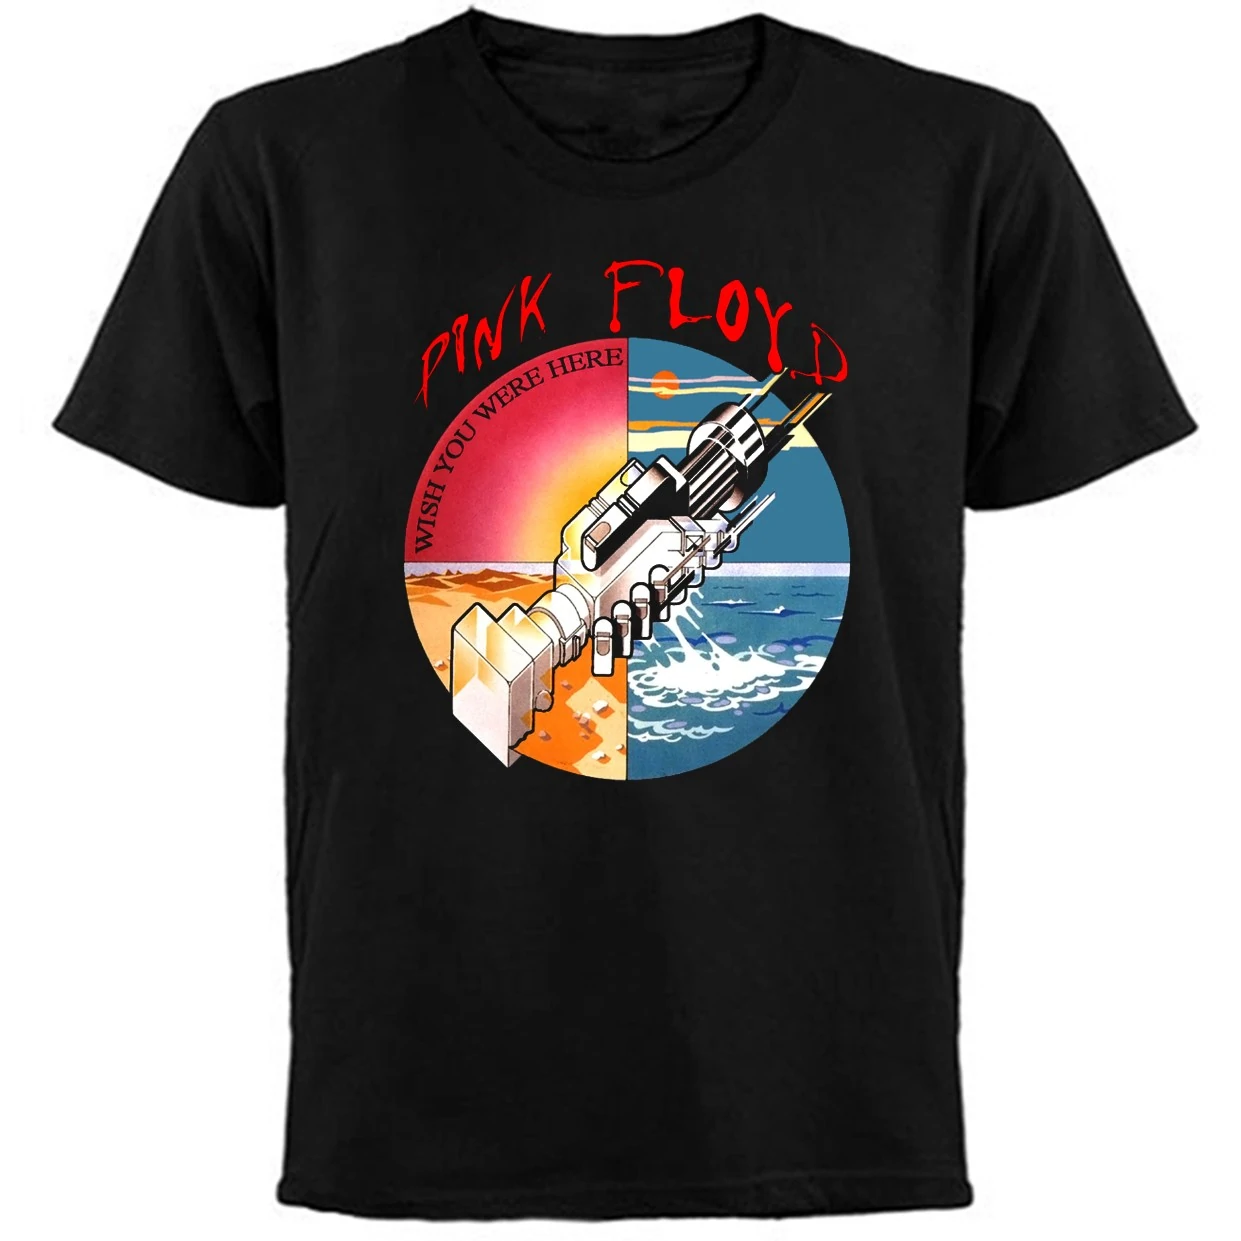 PINK FLOYD- Wish You Were Here- T-shirt